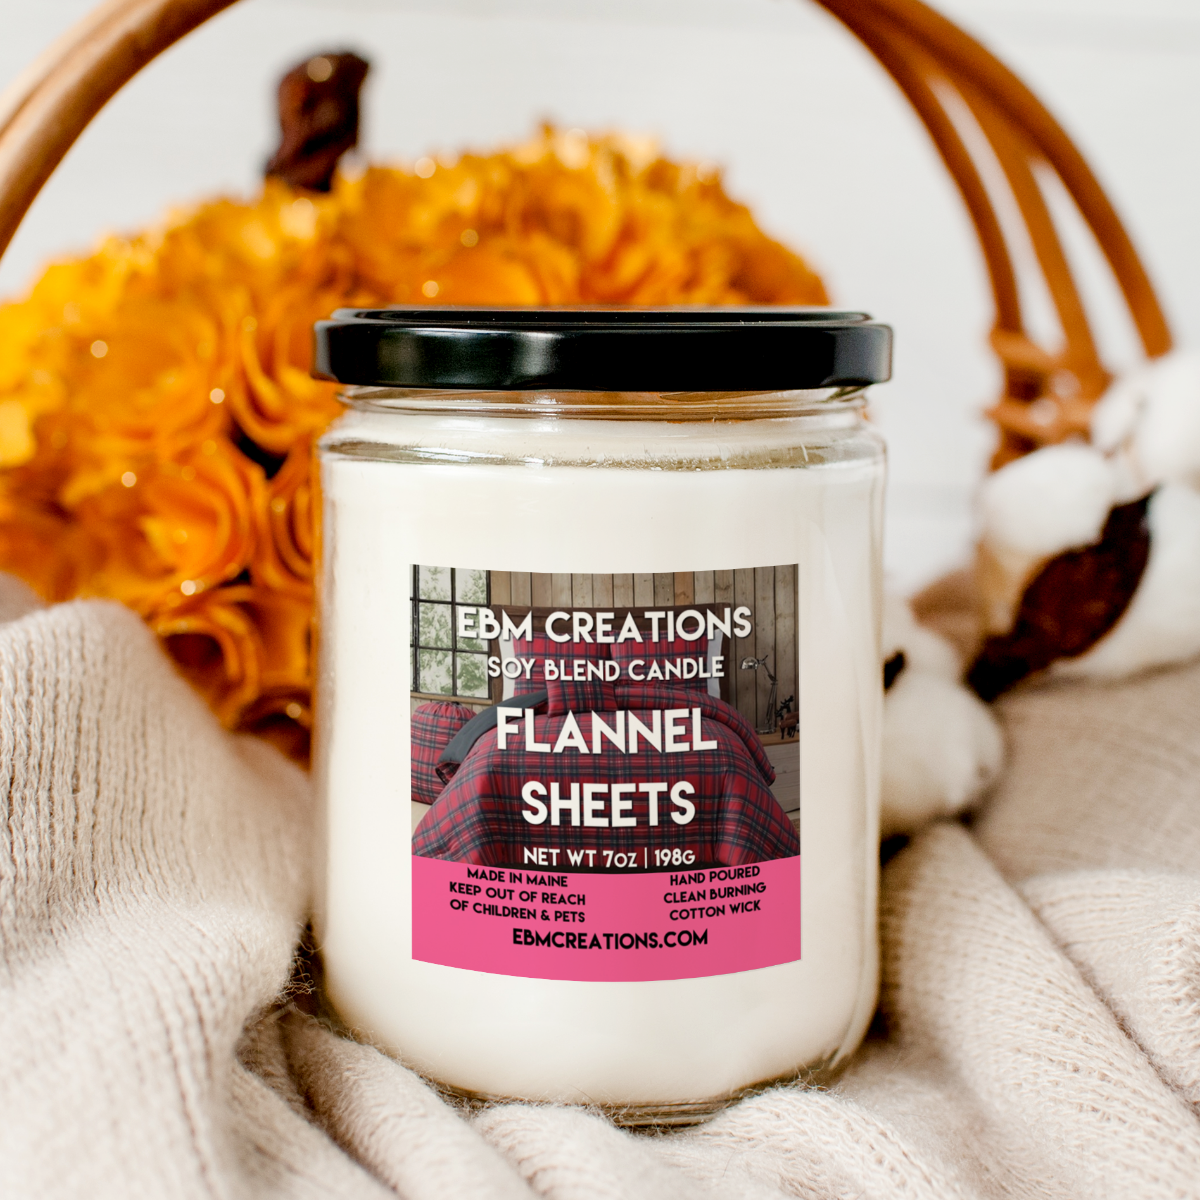 Flannel Sheets - 7oz  Soy Blend Candle